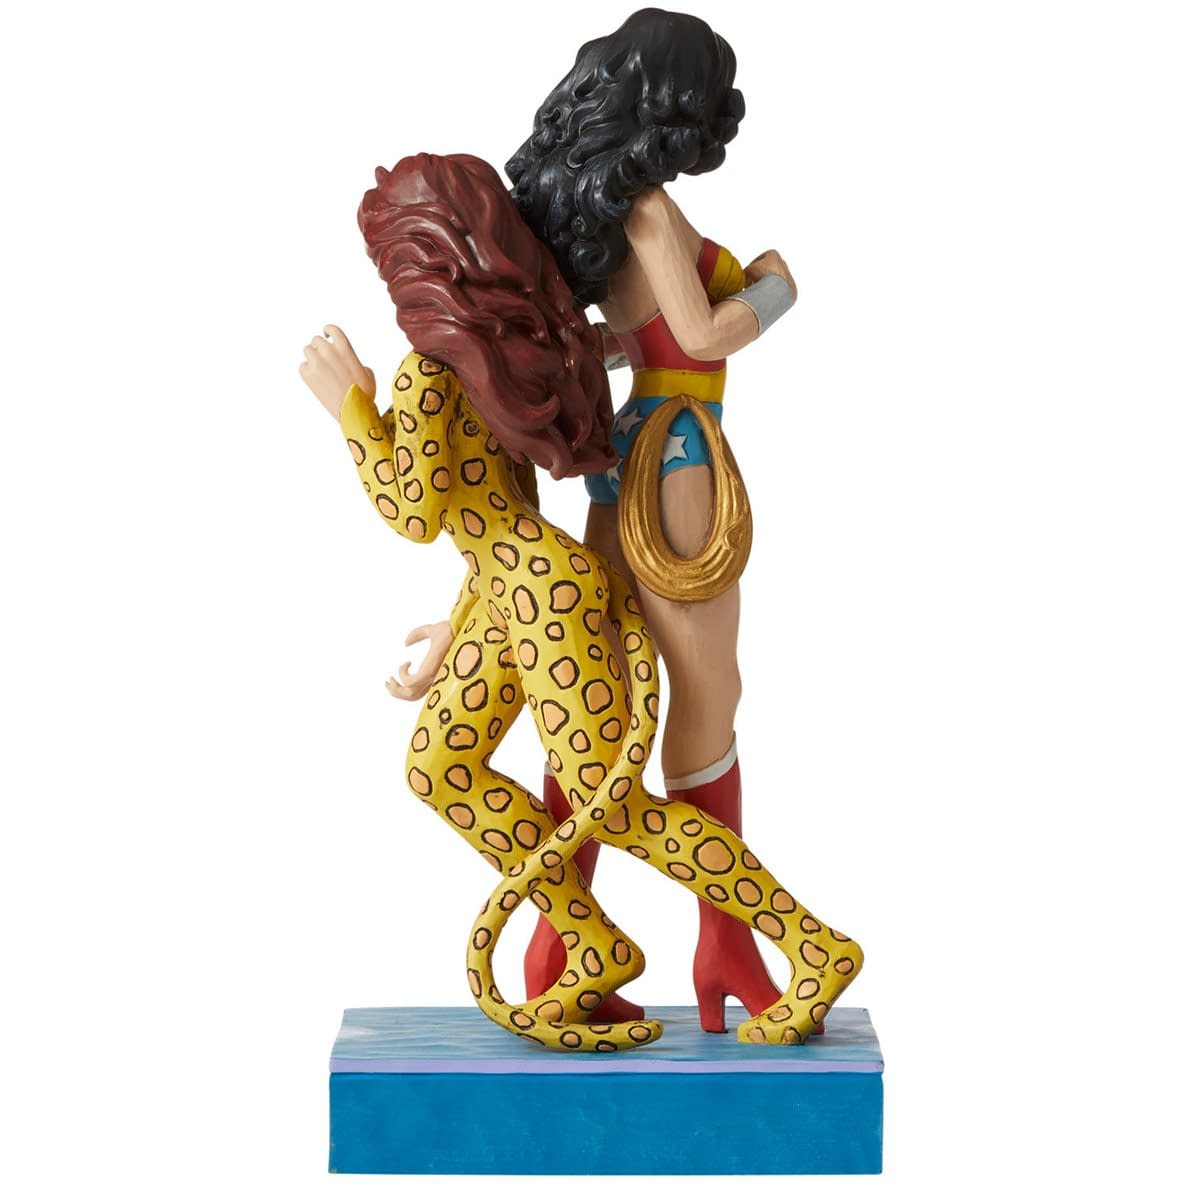 Wonder Woman and Cheetah Strike a Pose with Enesco